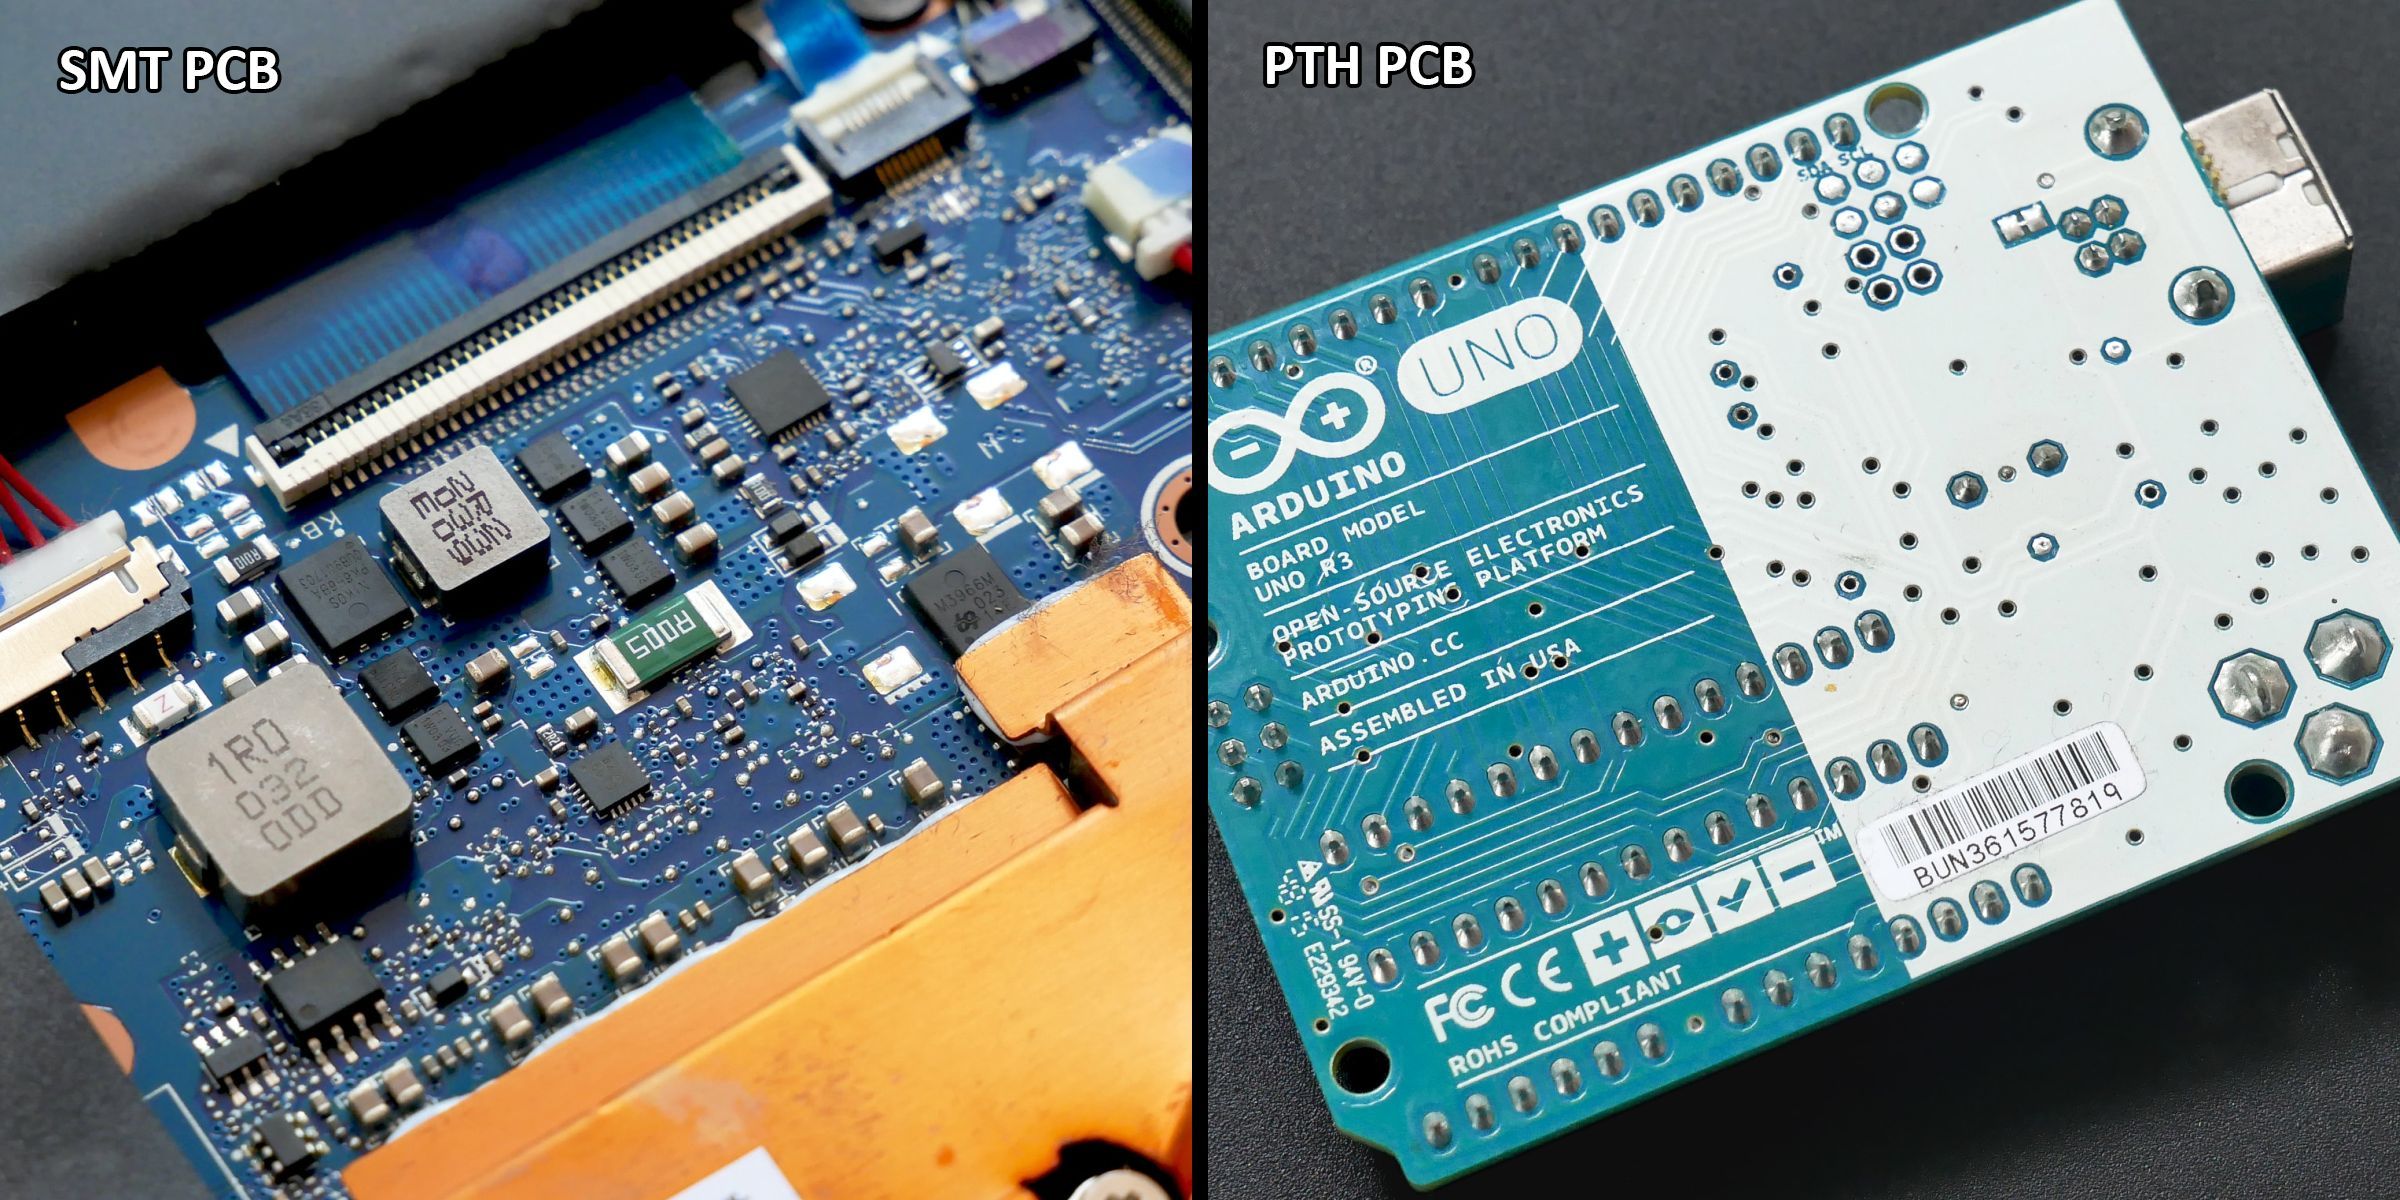 Comparison between SMT and PTH types of PCBs